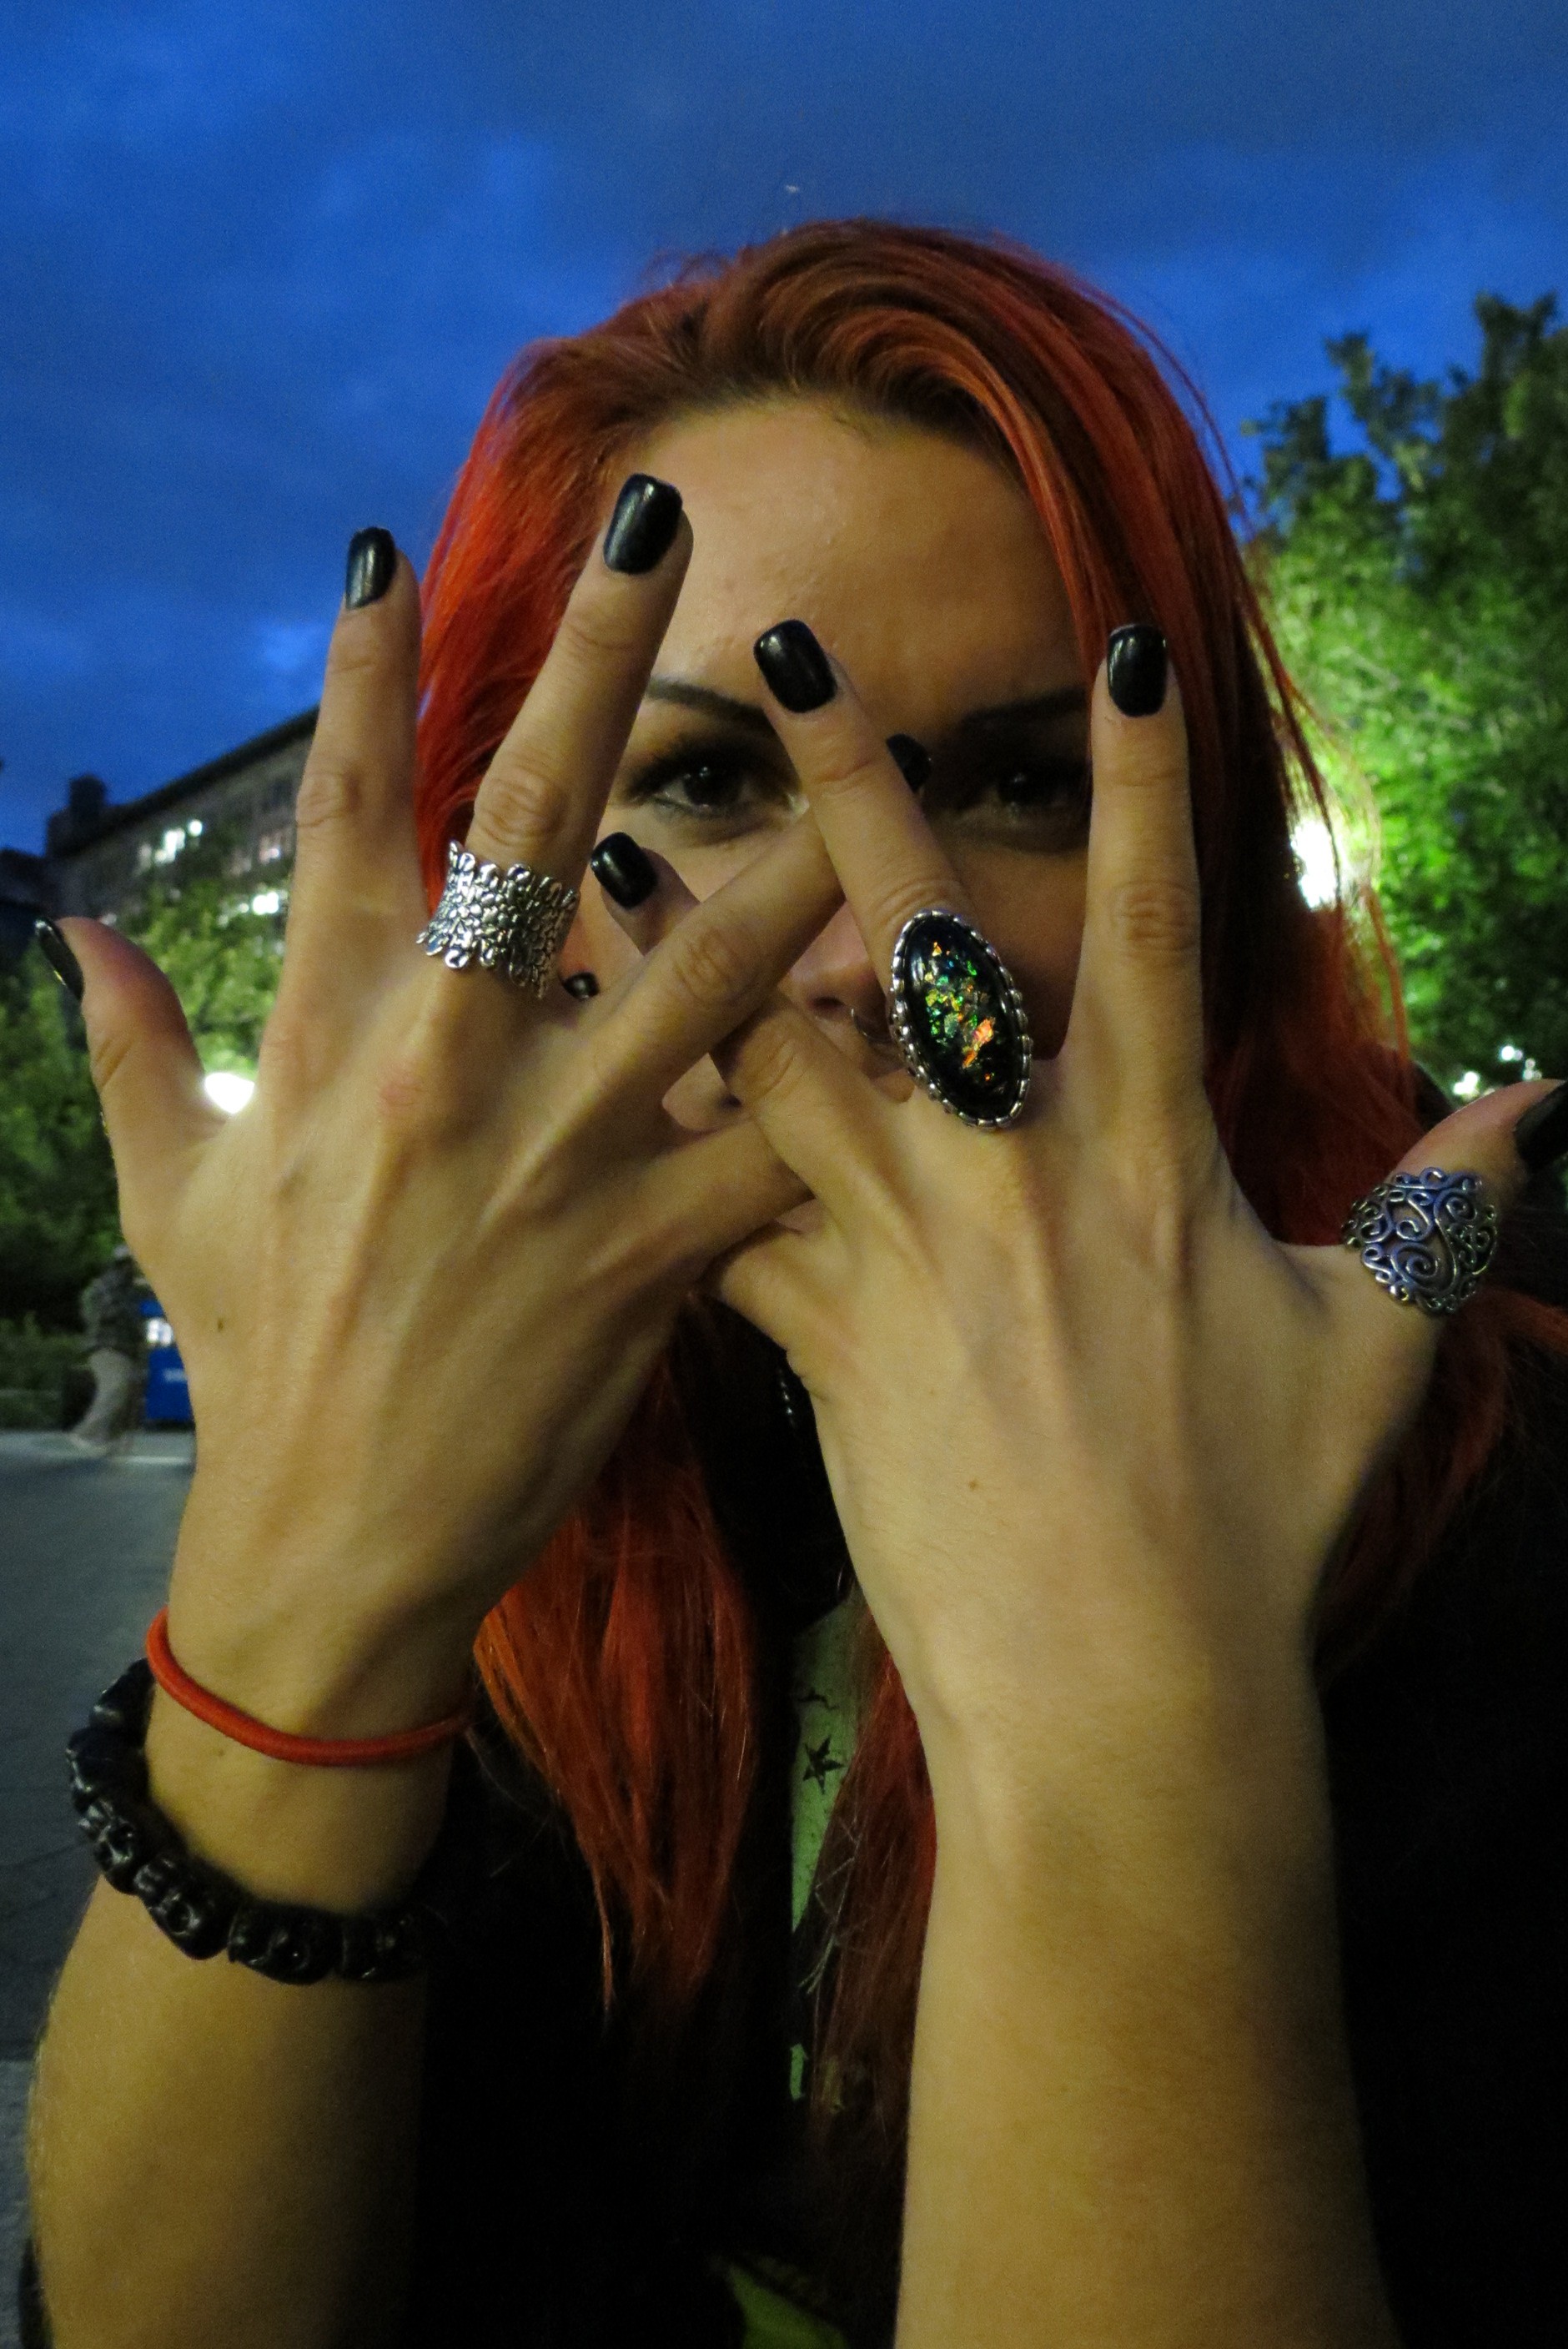 girl shows rings on hands